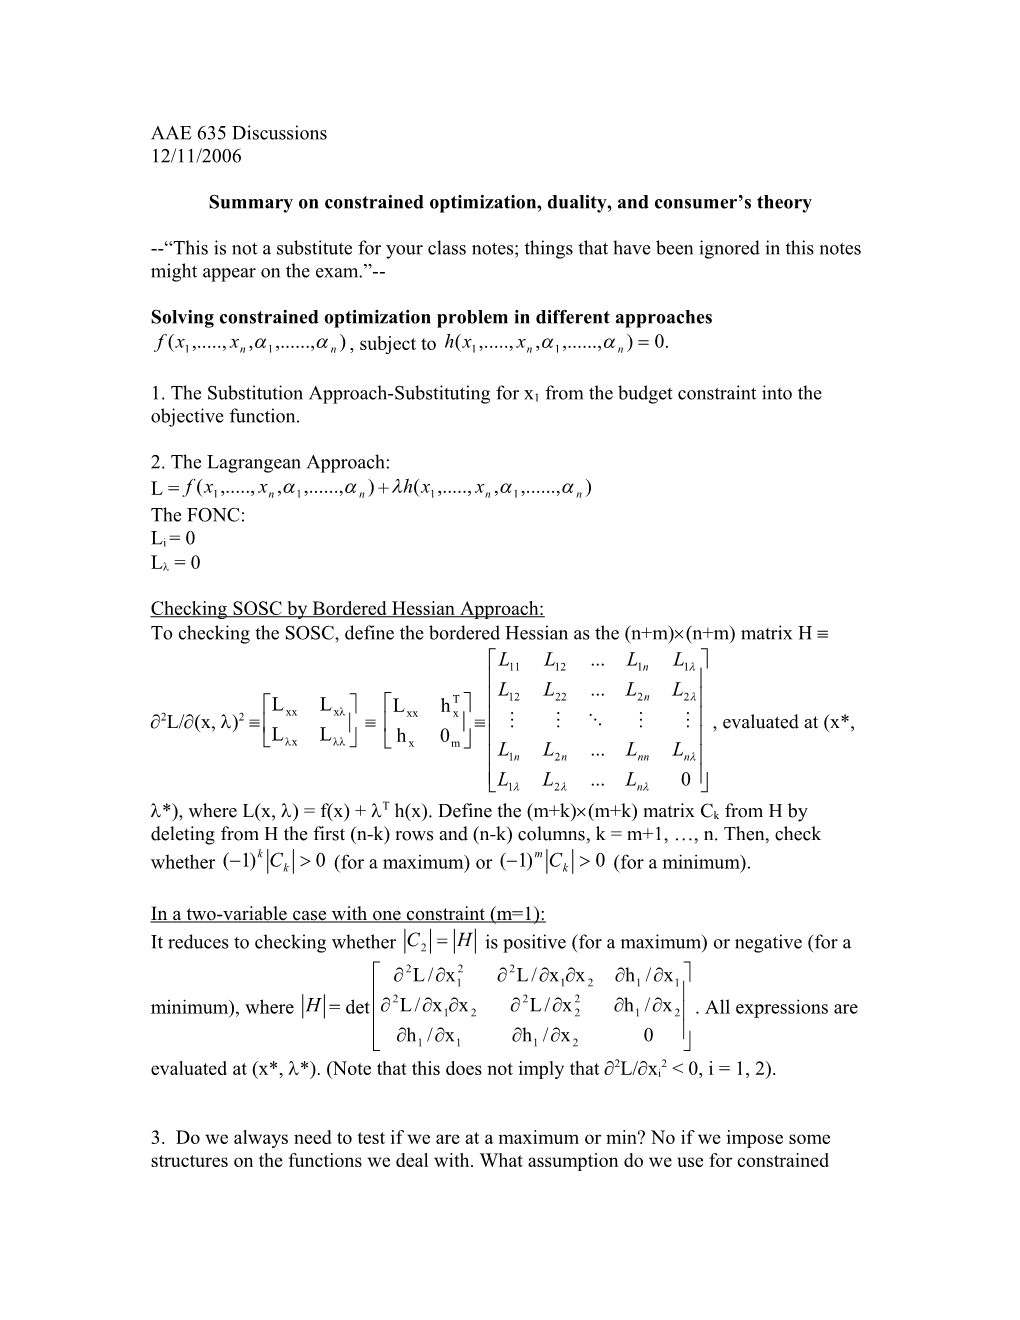 Summary on Constrained Optimization, Duality, Consumer S Theory